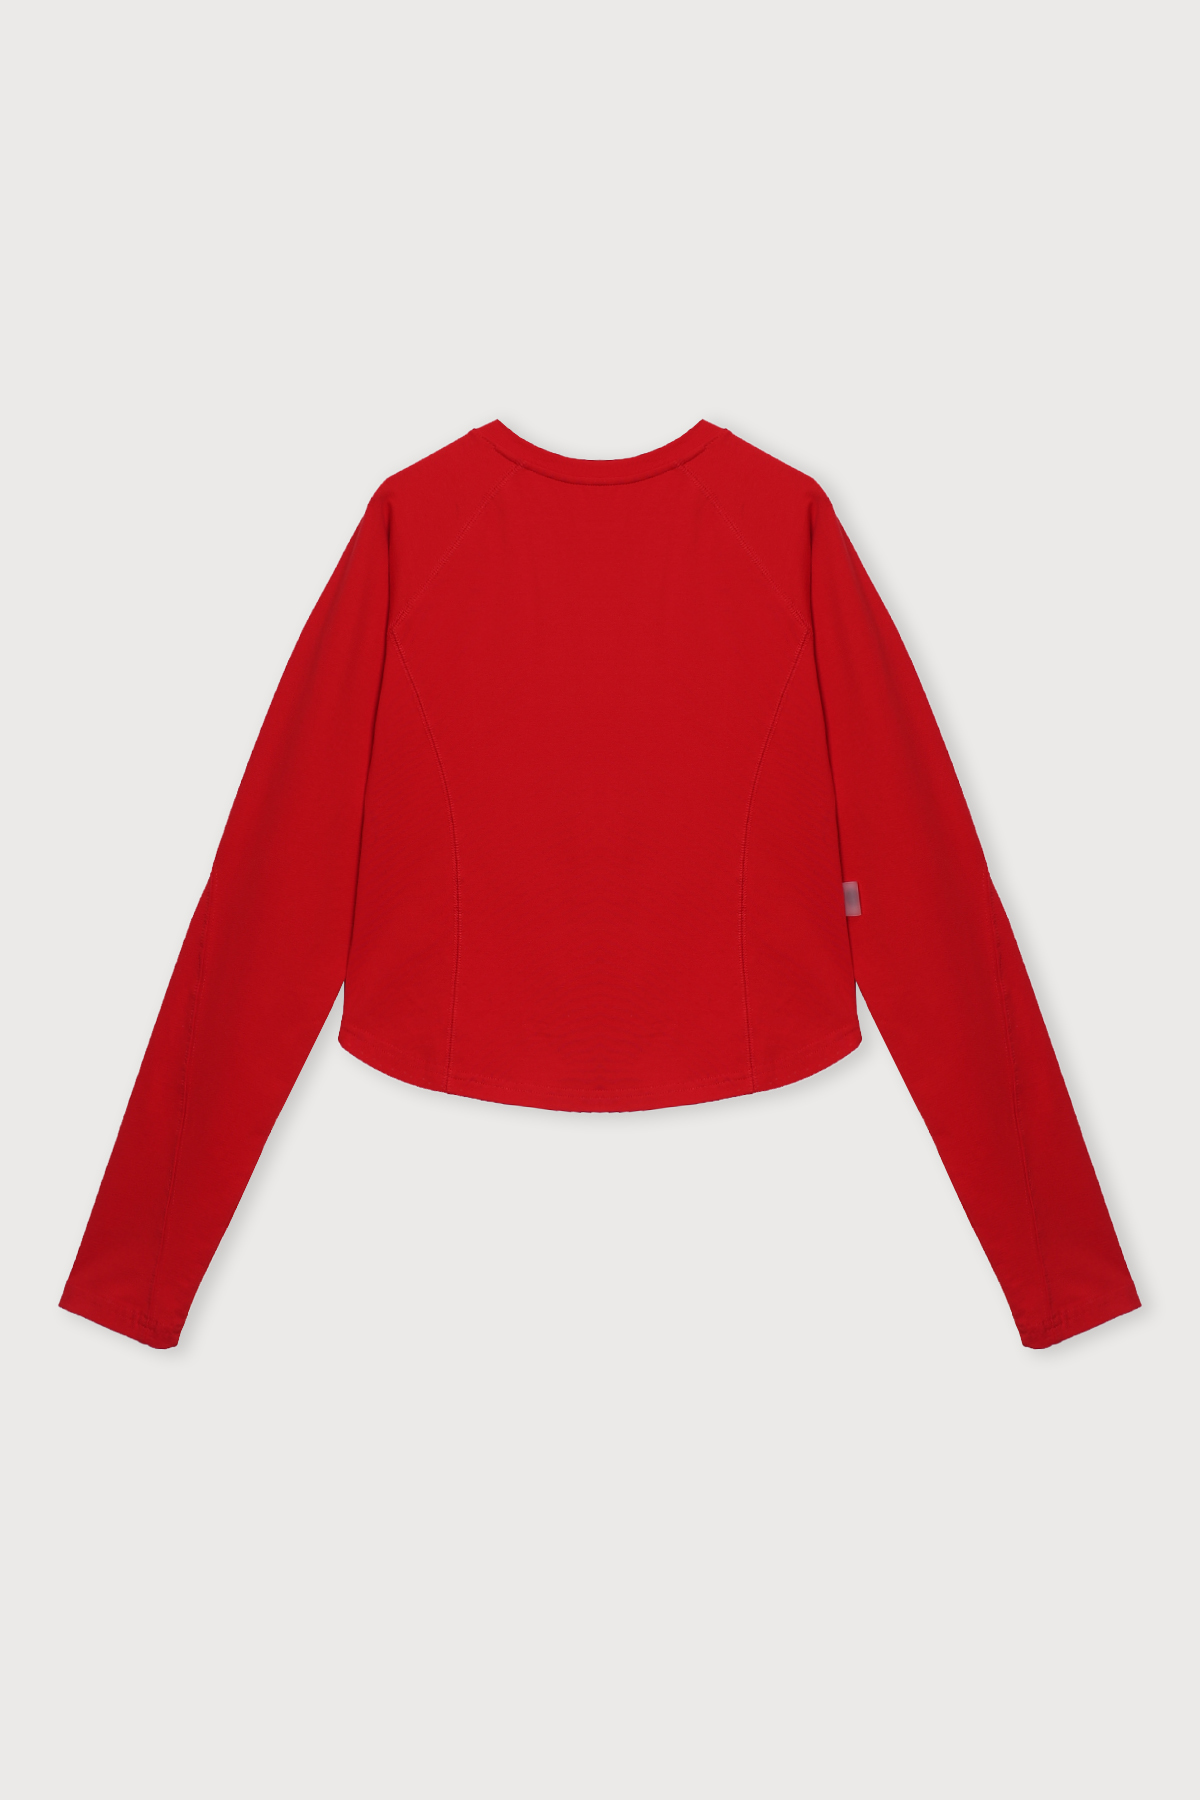 LINE SLEEVE TOP(RED)